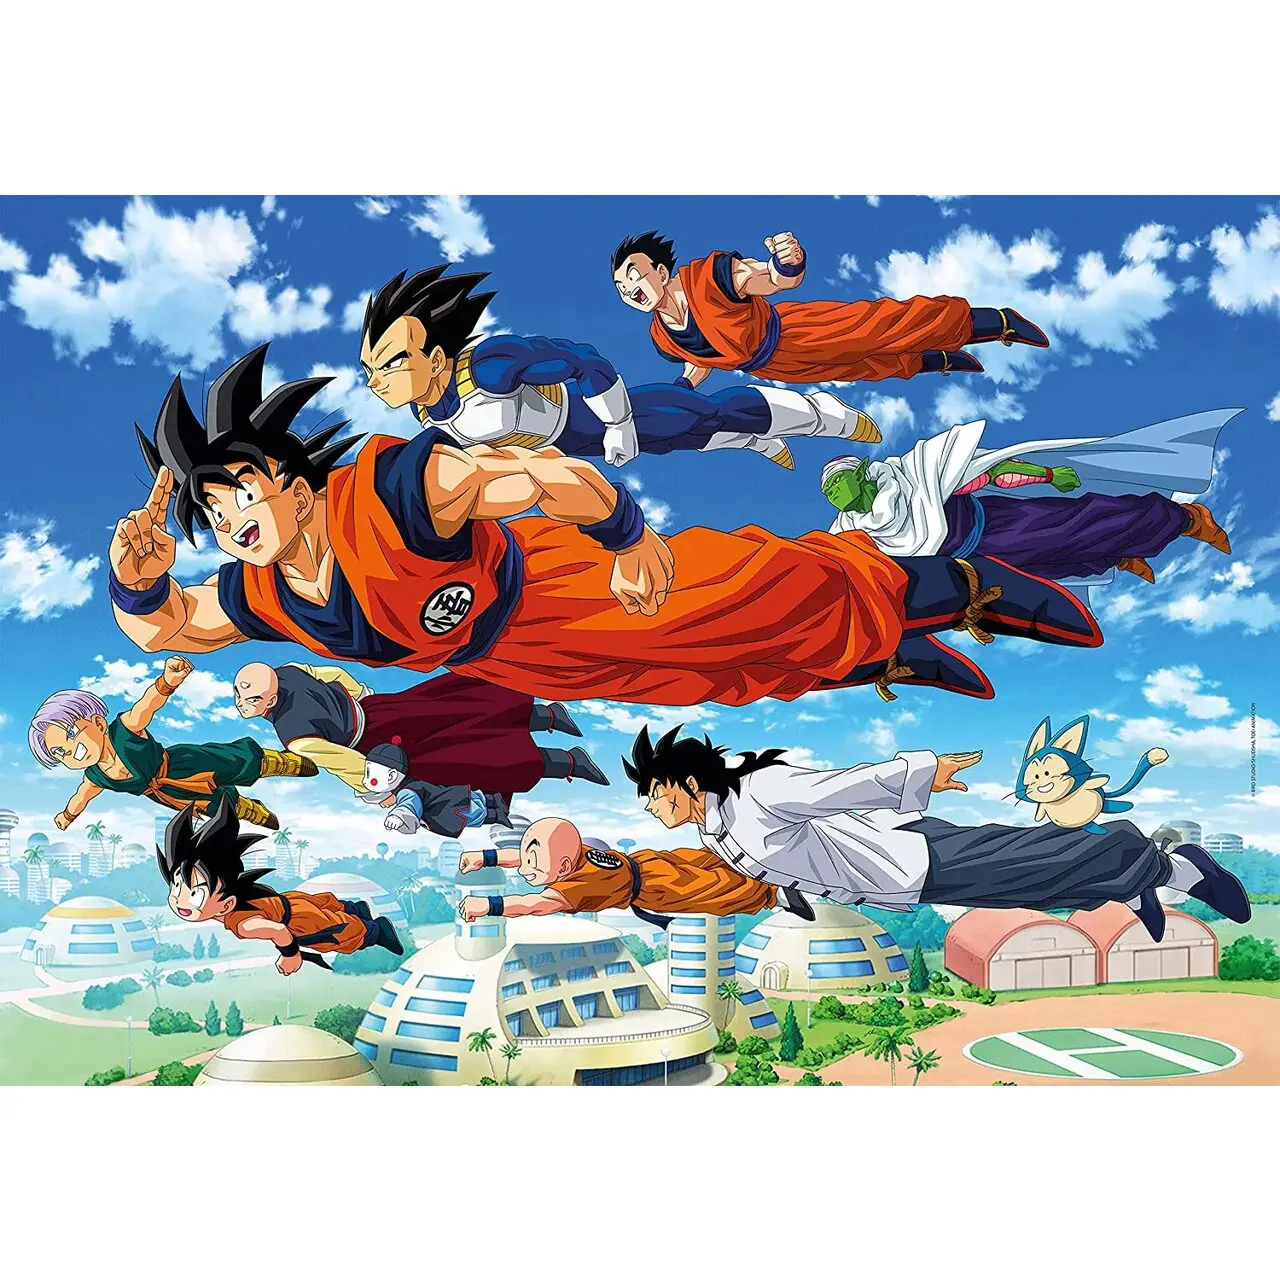 Puzzle Dragonball 1000 Teile